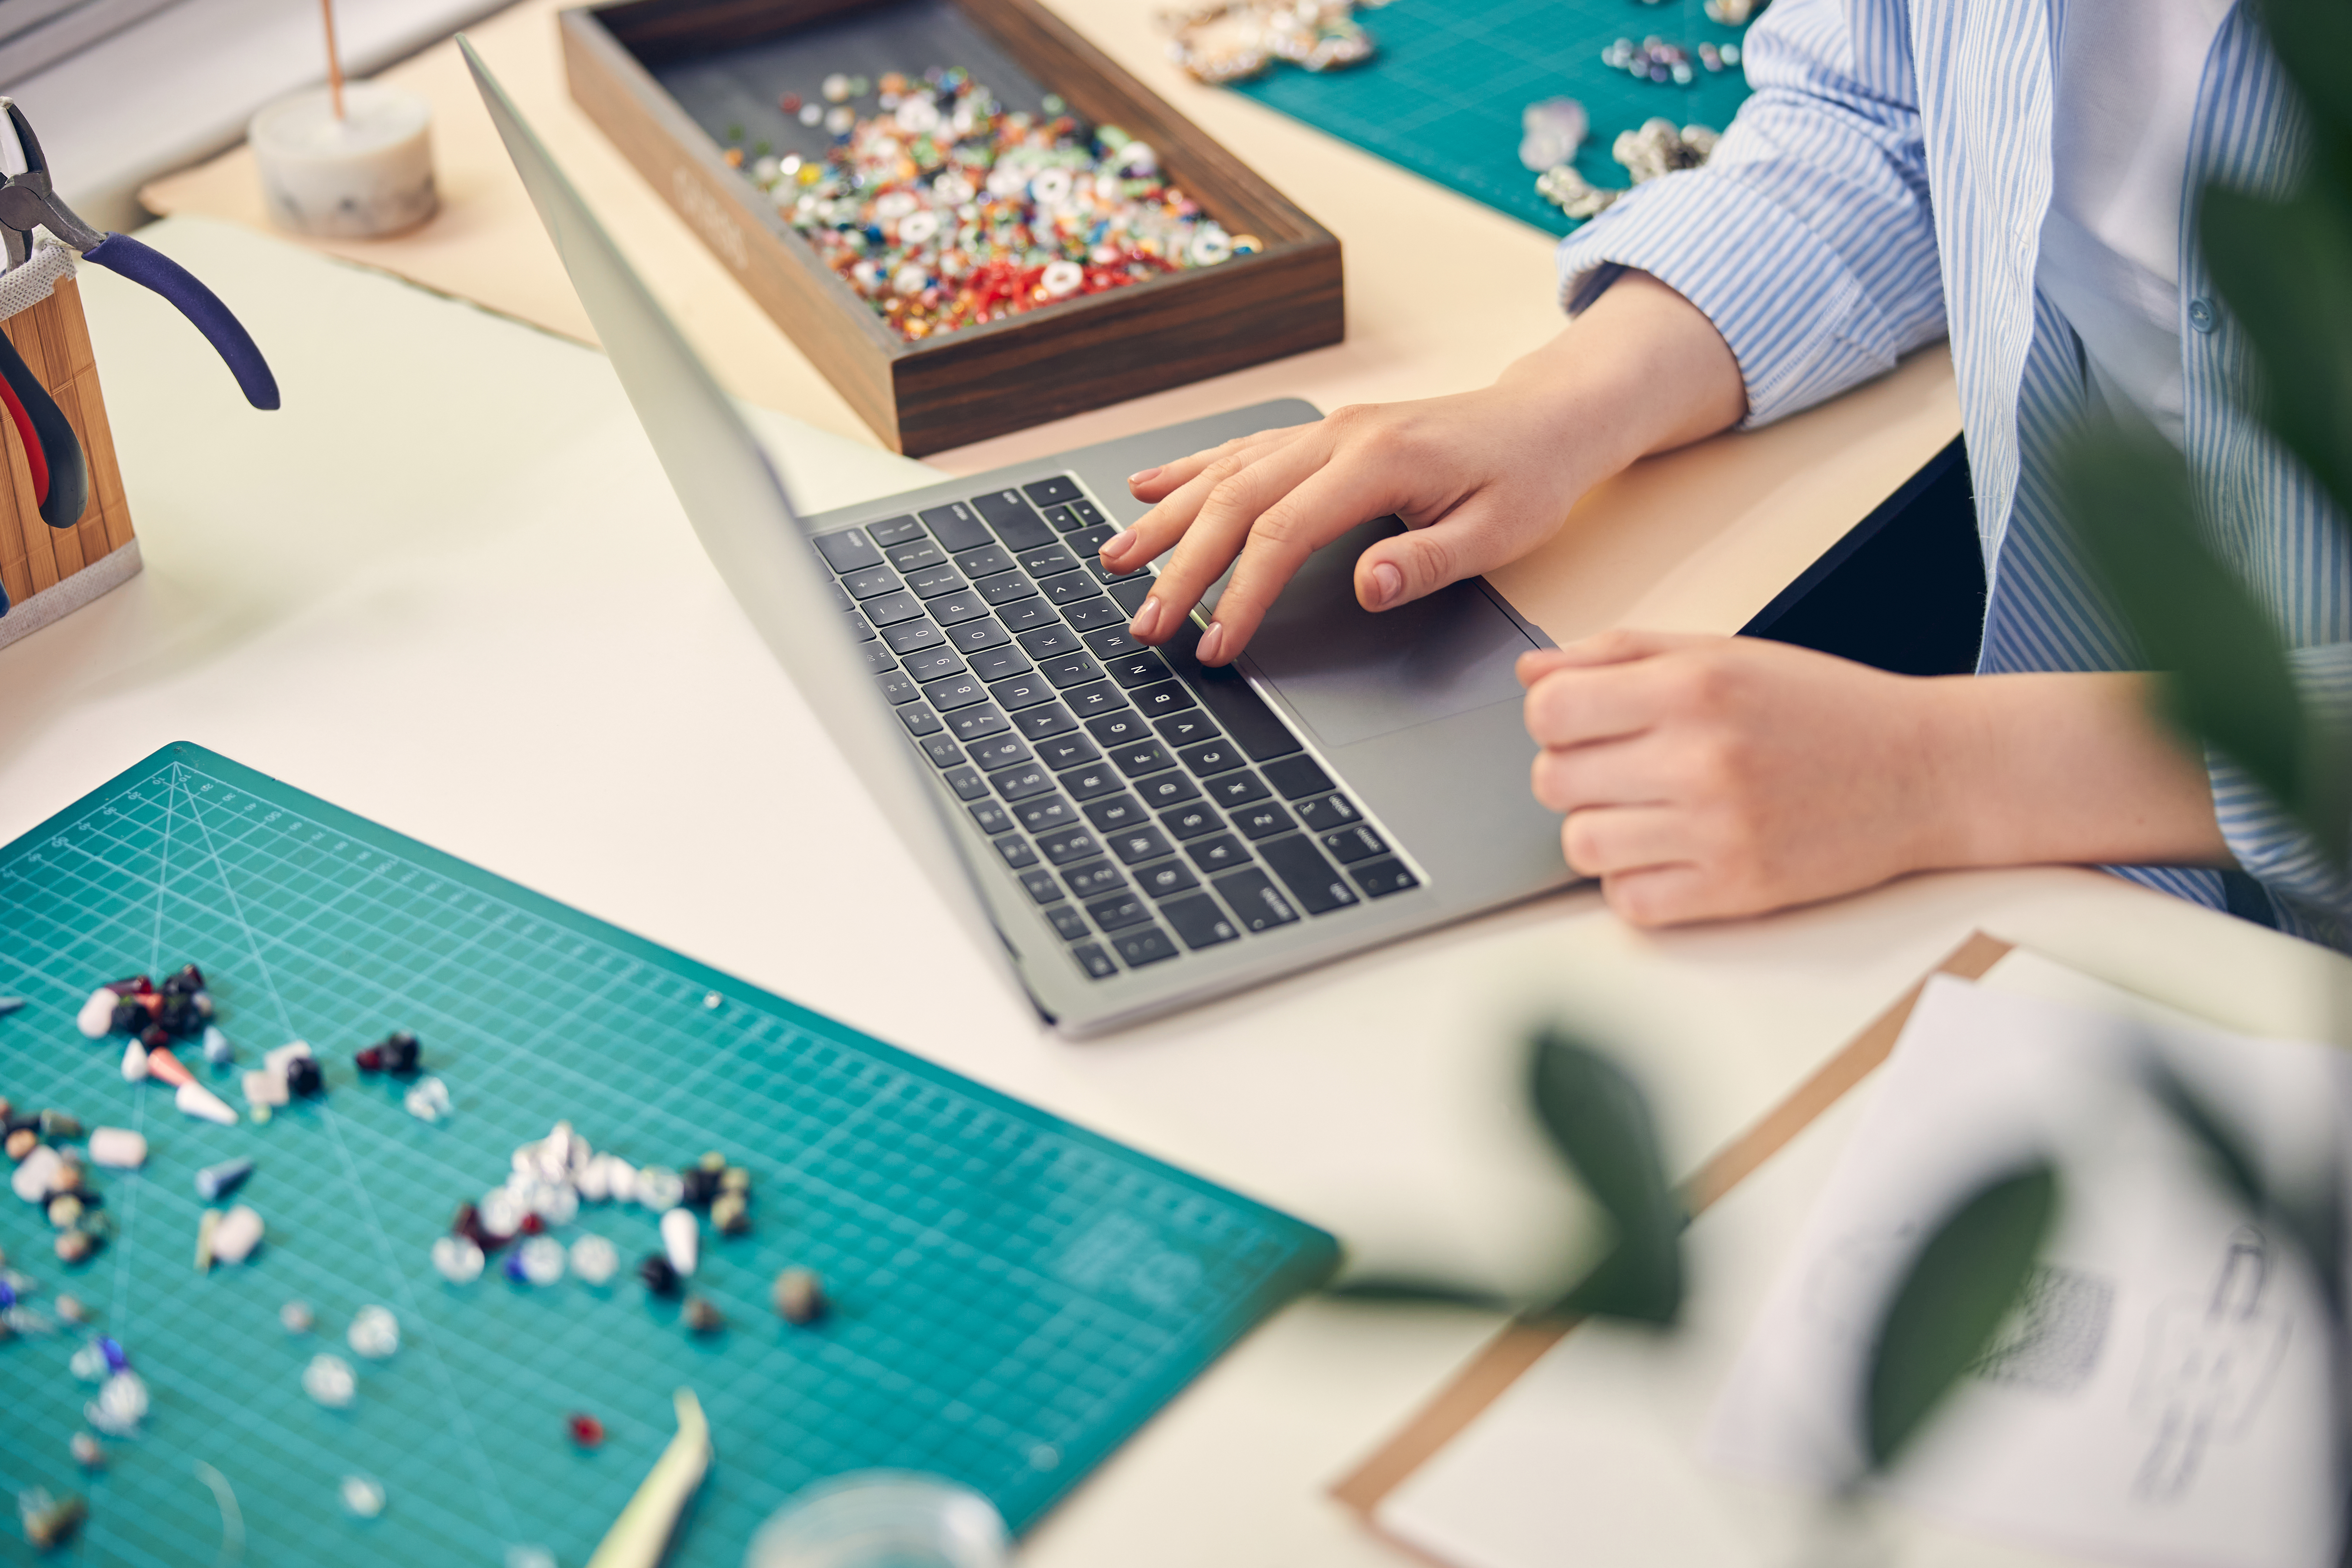 woman using laptop surrounded by beads 